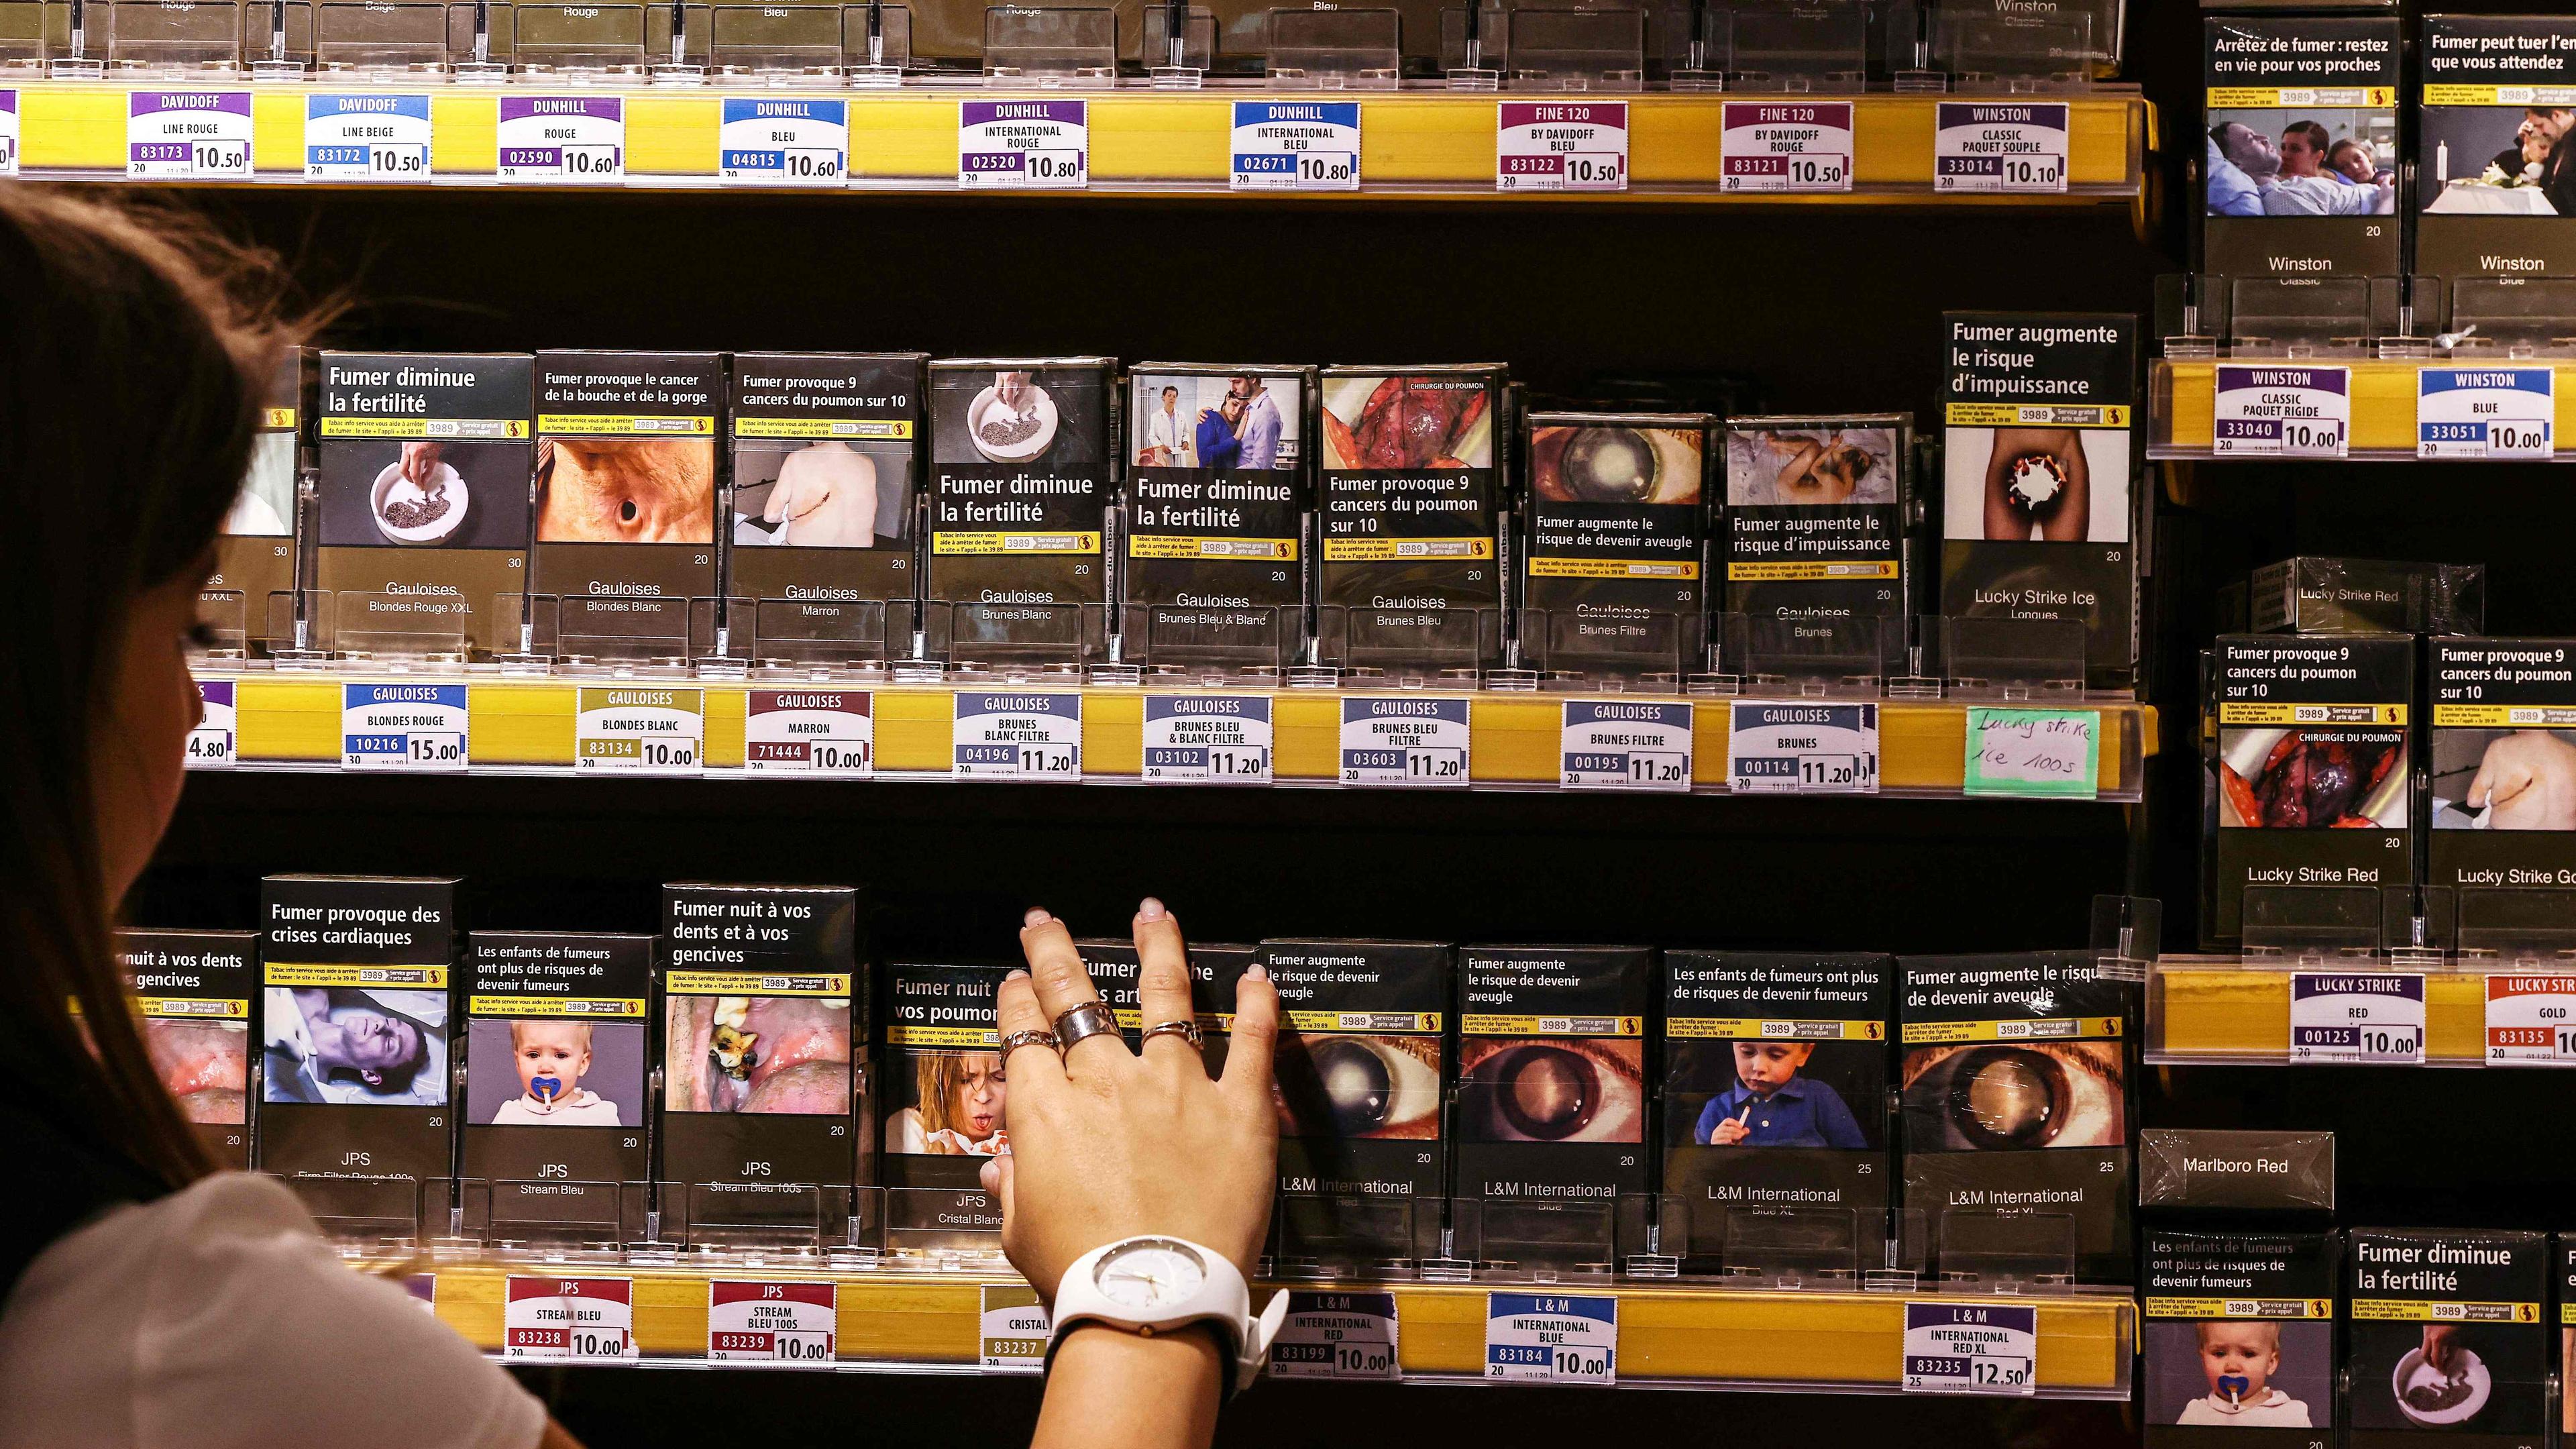 Prices for cigarettes in Luxembourg will increase by 10 cents for a pack of 20 cigarettes and 30 cents per pack of 50g rolling tobacco.